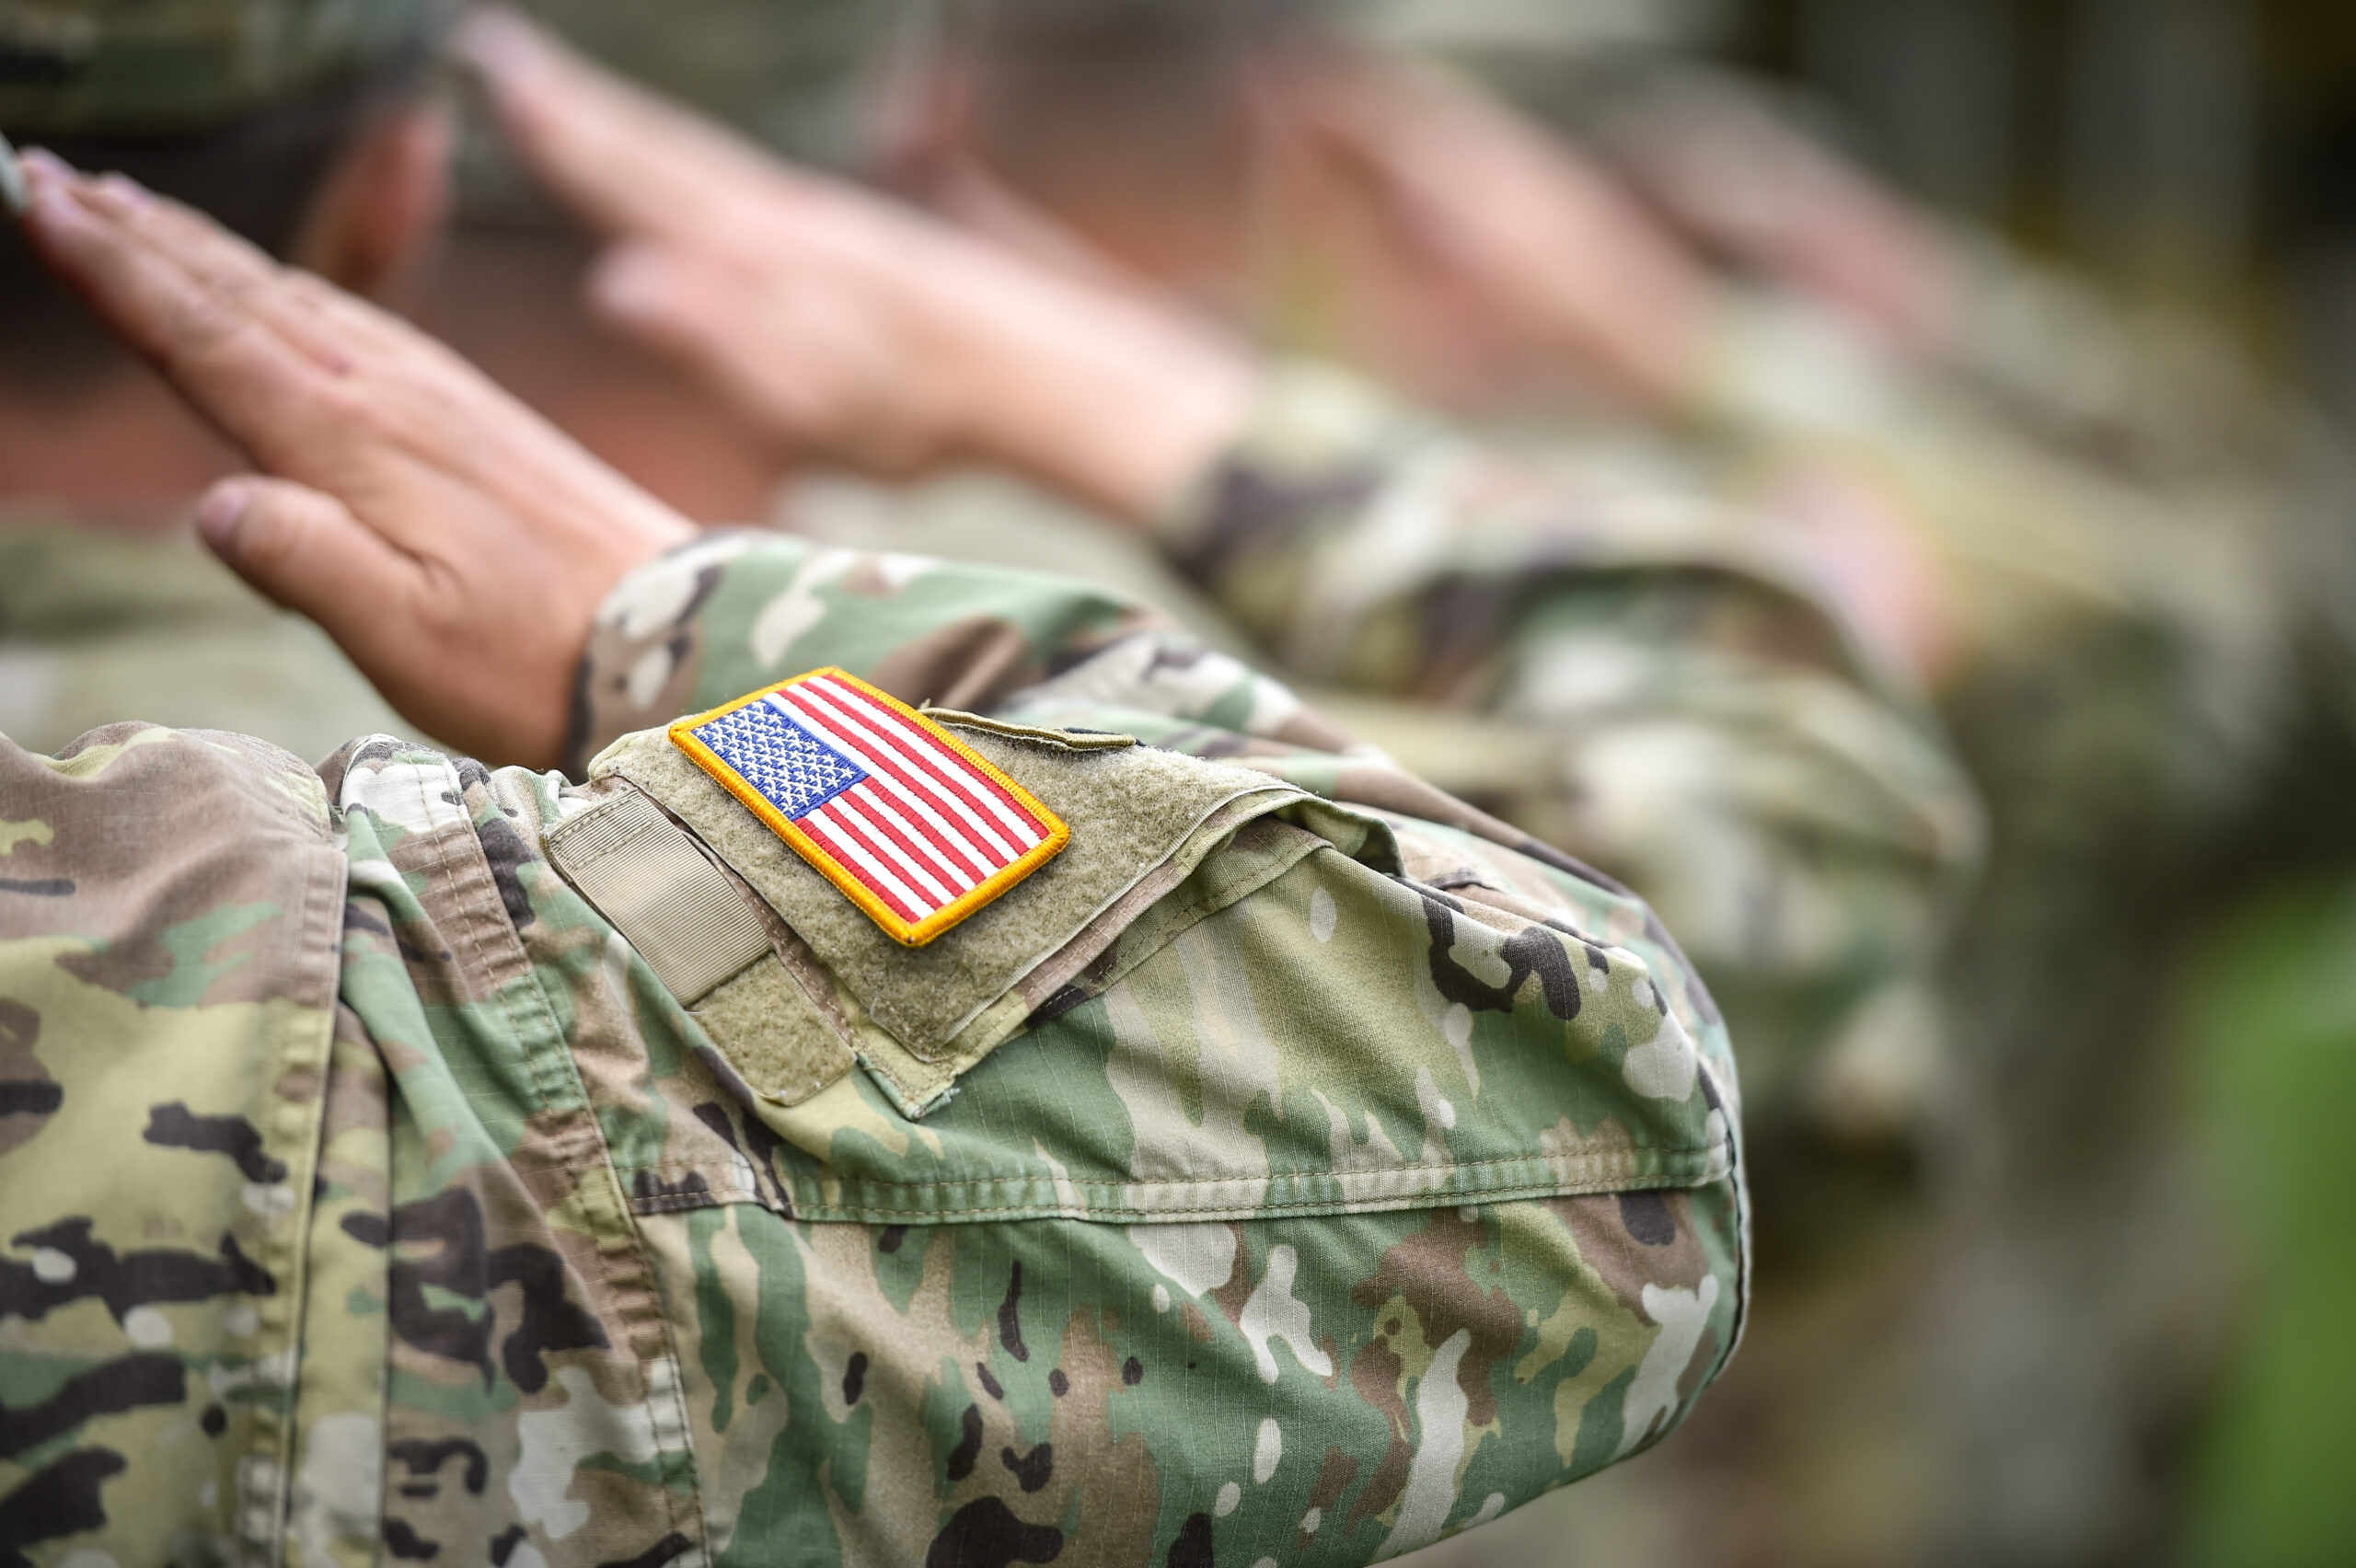 Detail Shot With American Flag On Soldier Uniform, Giving The Honor Salute During Military Ceremony